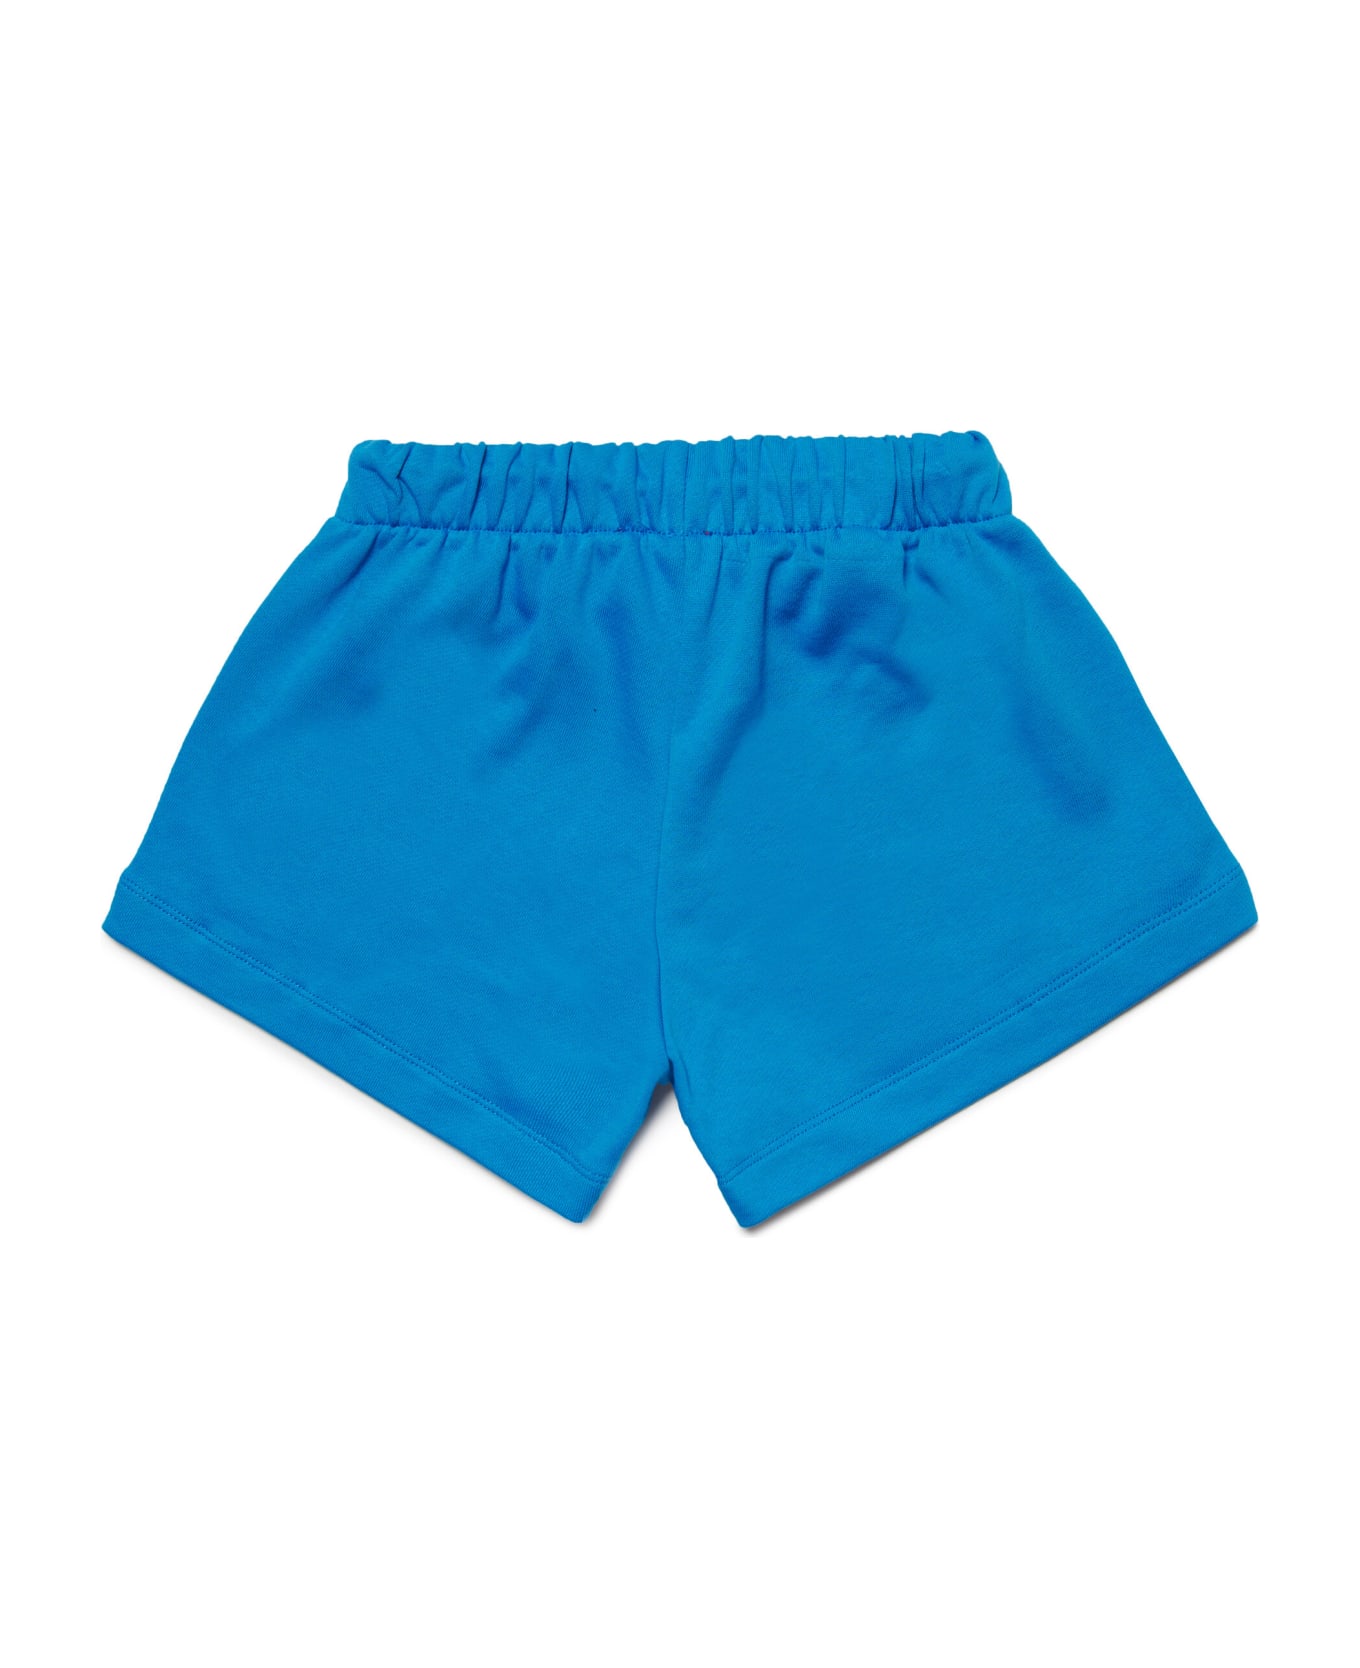 Diesel Paglife Shorts Diesel Fleece Shorts With Puffy Print